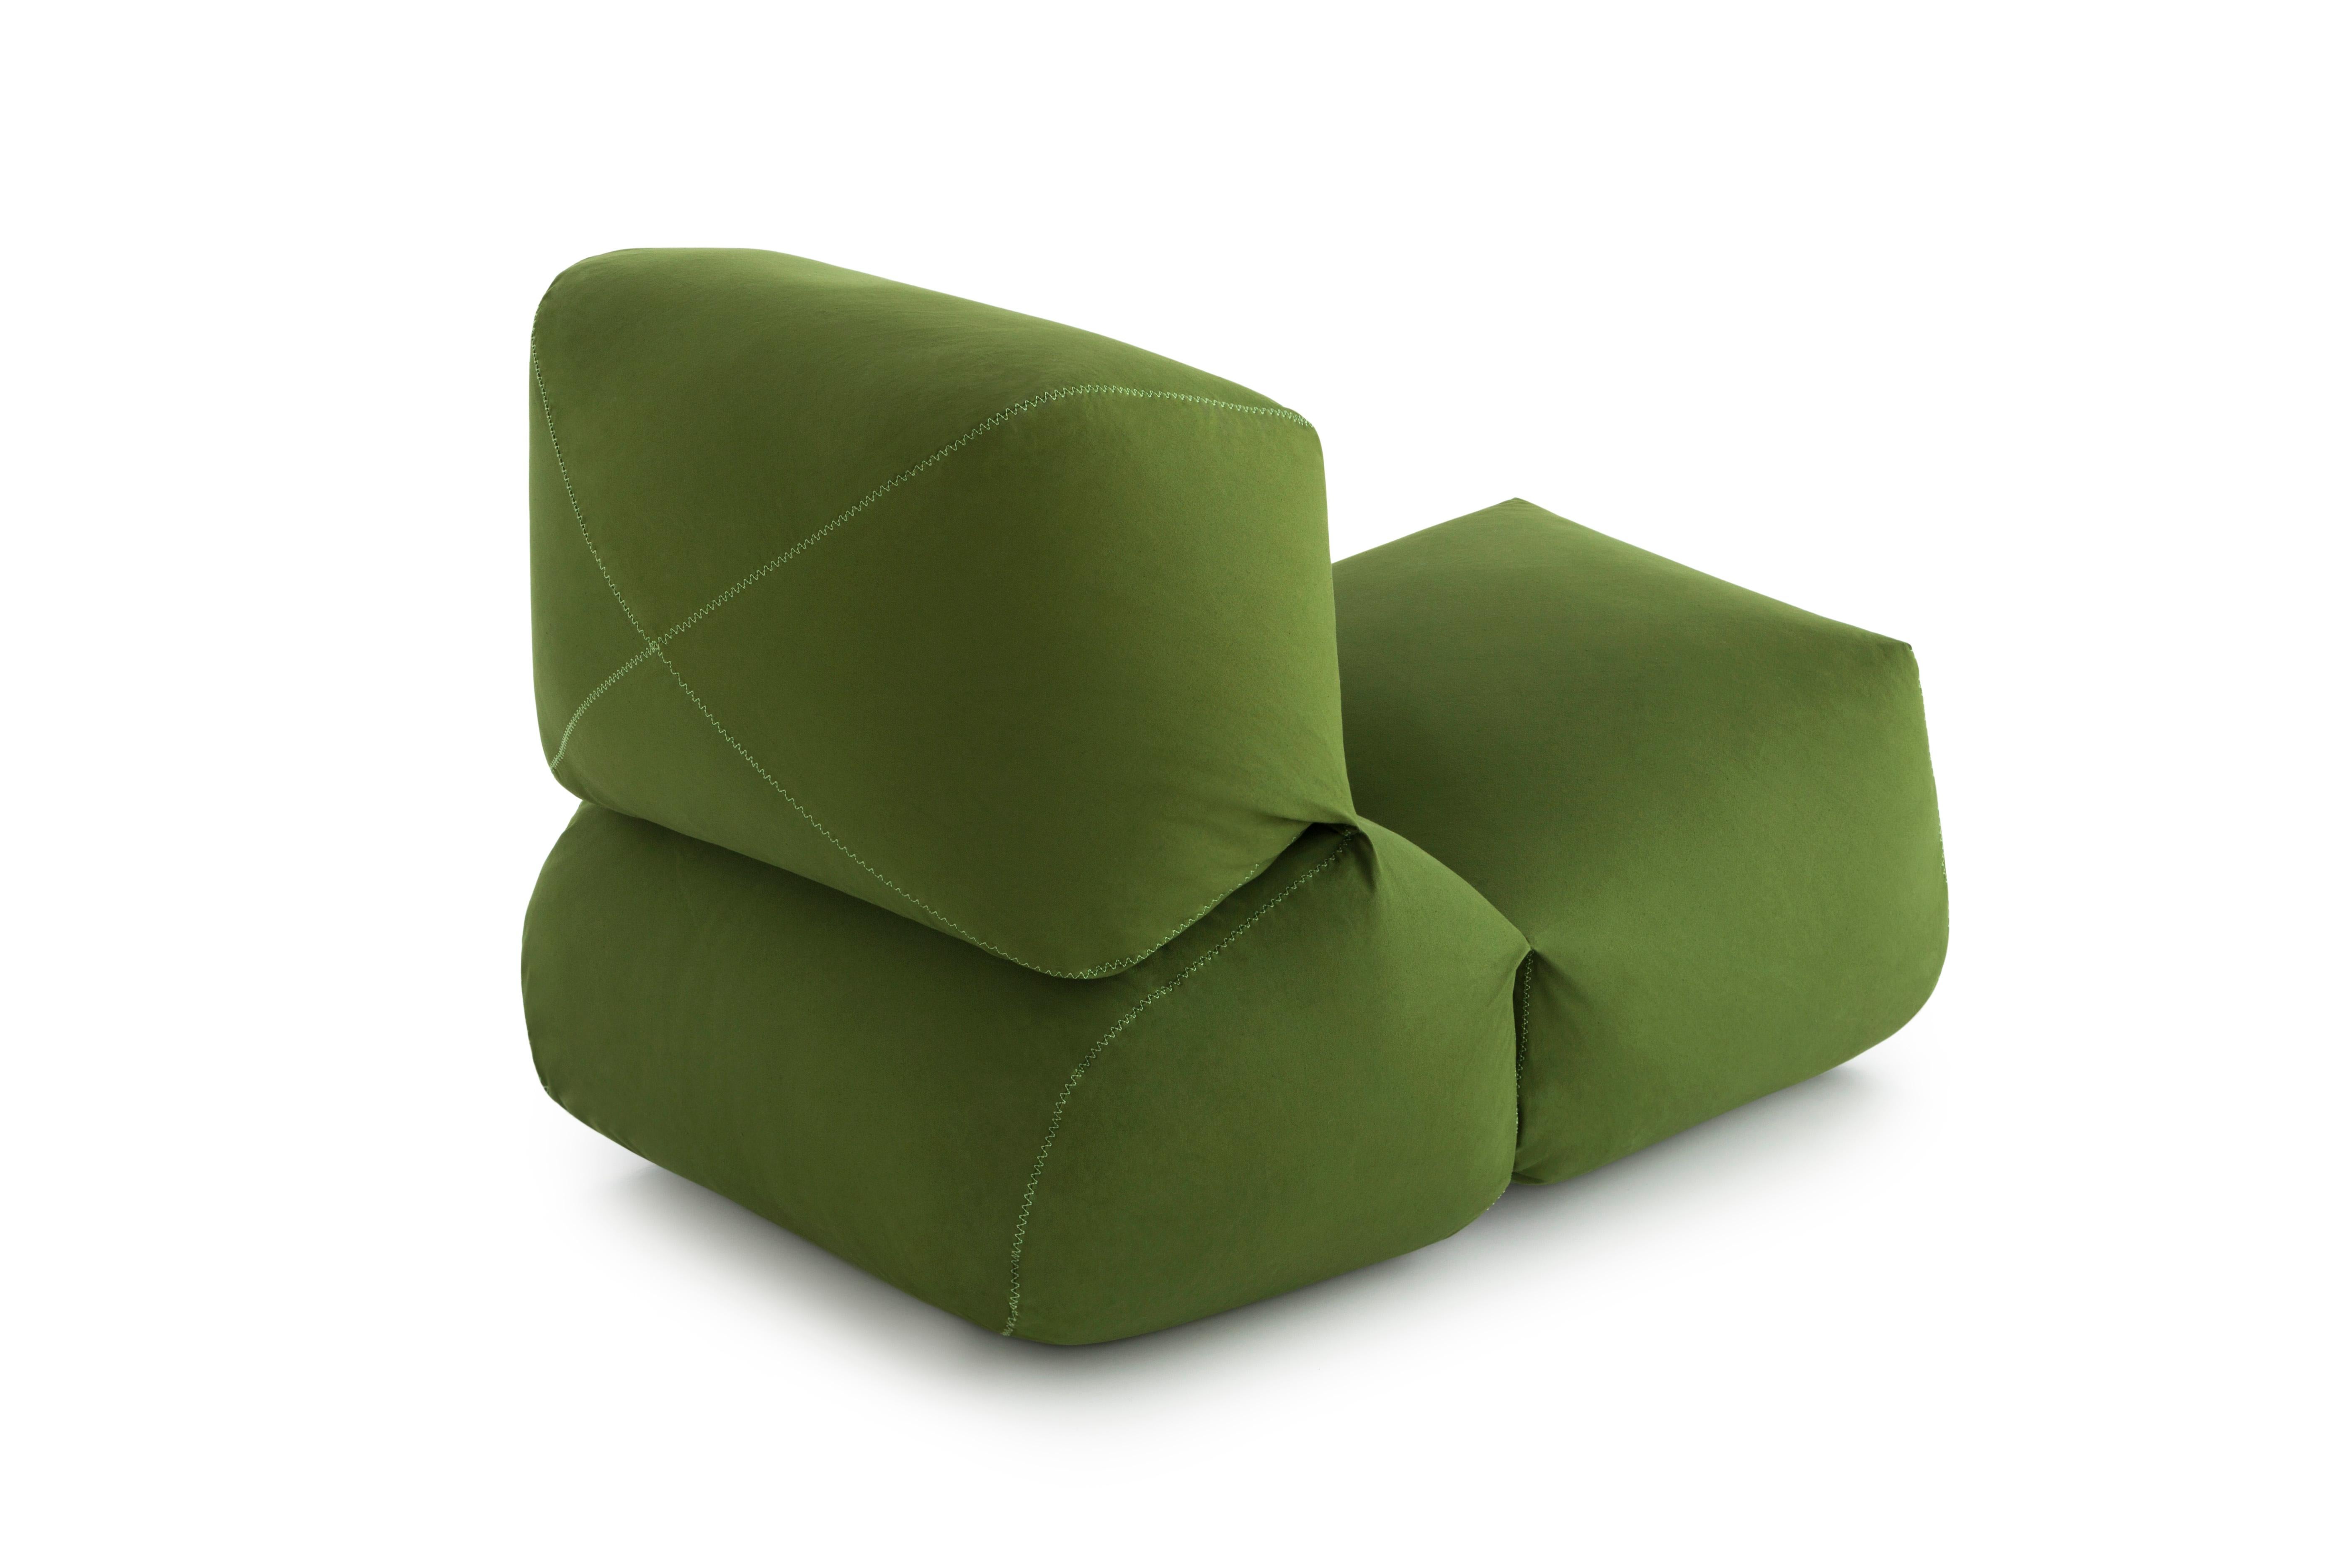 This innovative easychair is available in two different cotton fabrics, canvas and velvet, in five colour choices with reinforced seams with contrasting colours and a filling of polystyrene balls that adapt to body movement. The result an origi- nal